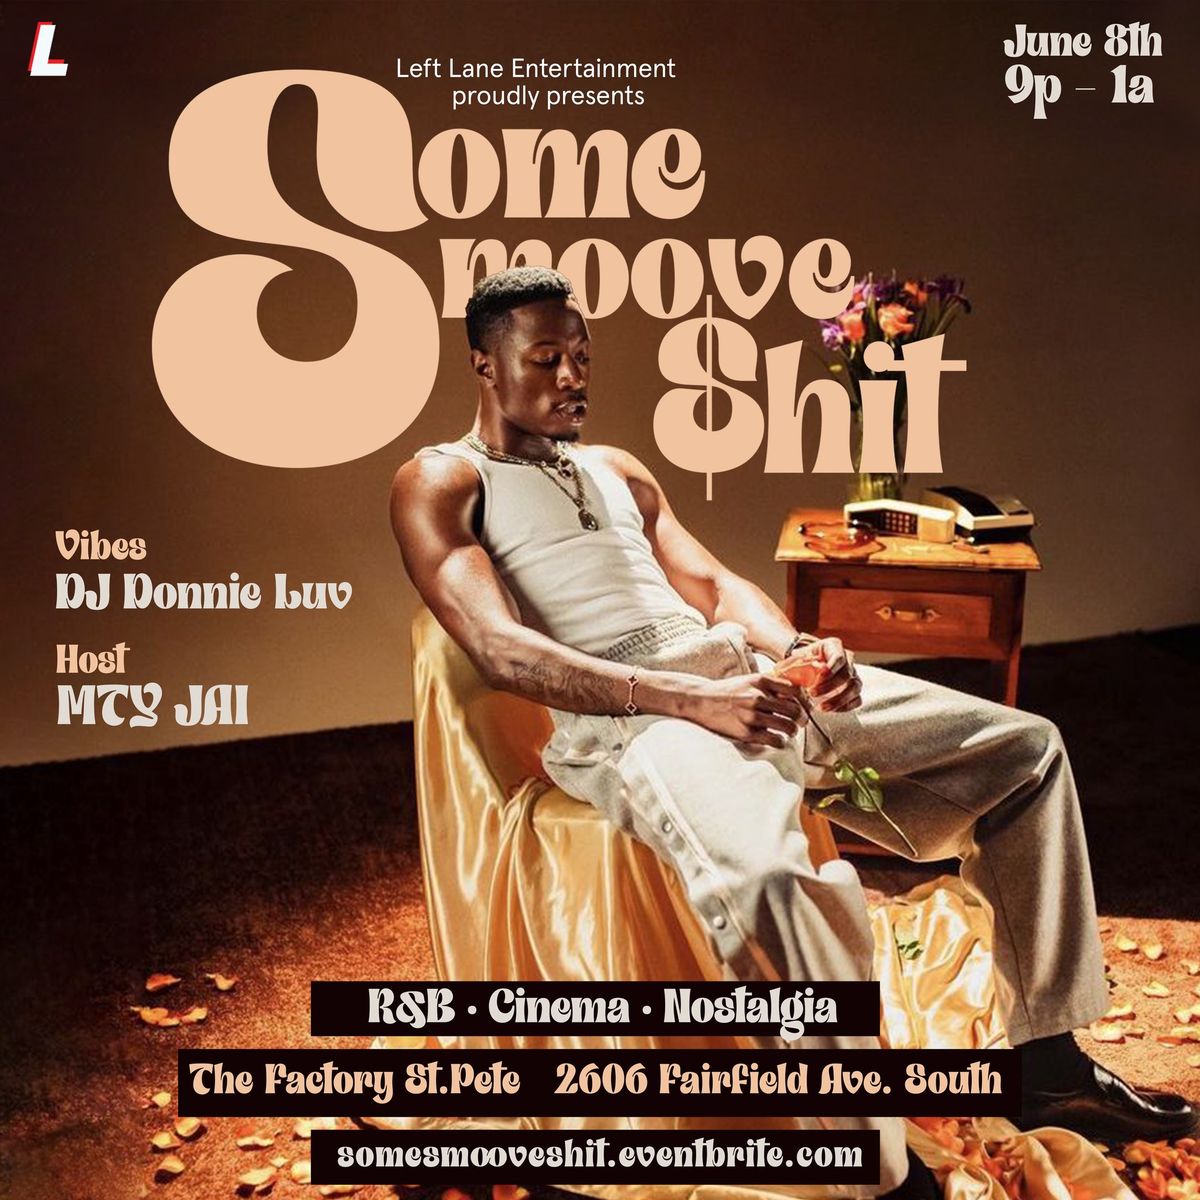 Left Lane Ent. Proudly Presents: SOME SMOOVE $HIT